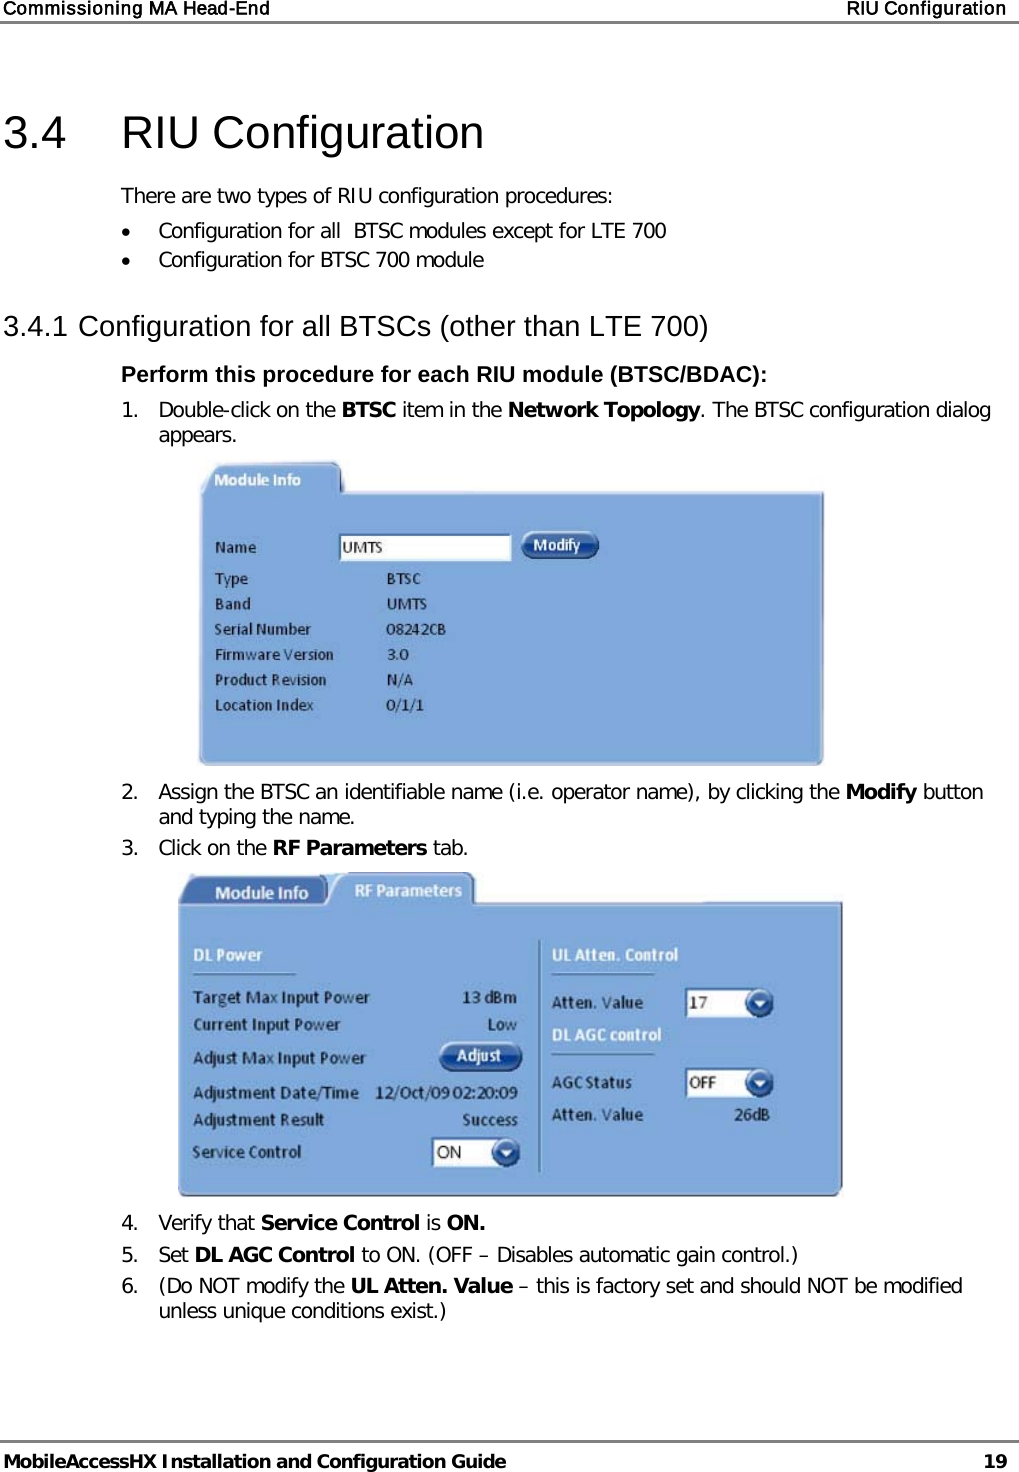 Commissioning MA Head-End    RIU Configuration   MobileAccessHX Installation and Configuration Guide   19  3.4  RIU Configuration There are two types of RIU configuration procedures: • Configuration for all  BTSC modules except for LTE 700 • Configuration for BTSC 700 module 3.4.1 Configuration for all BTSCs (other than LTE 700) Perform this procedure for each RIU module (BTSC/BDAC): 1.  Double-click on the BTSC item in the Network Topology. The BTSC configuration dialog appears.  2.  Assign the BTSC an identifiable name (i.e. operator name), by clicking the Modify button and typing the name.  3.  Click on the RF Parameters tab.  4.  Verify that Service Control is ON.  5.  Set DL AGC Control to ON. (OFF – Disables automatic gain control.) 6.  (Do NOT modify the UL Atten. Value – this is factory set and should NOT be modified unless unique conditions exist.) 